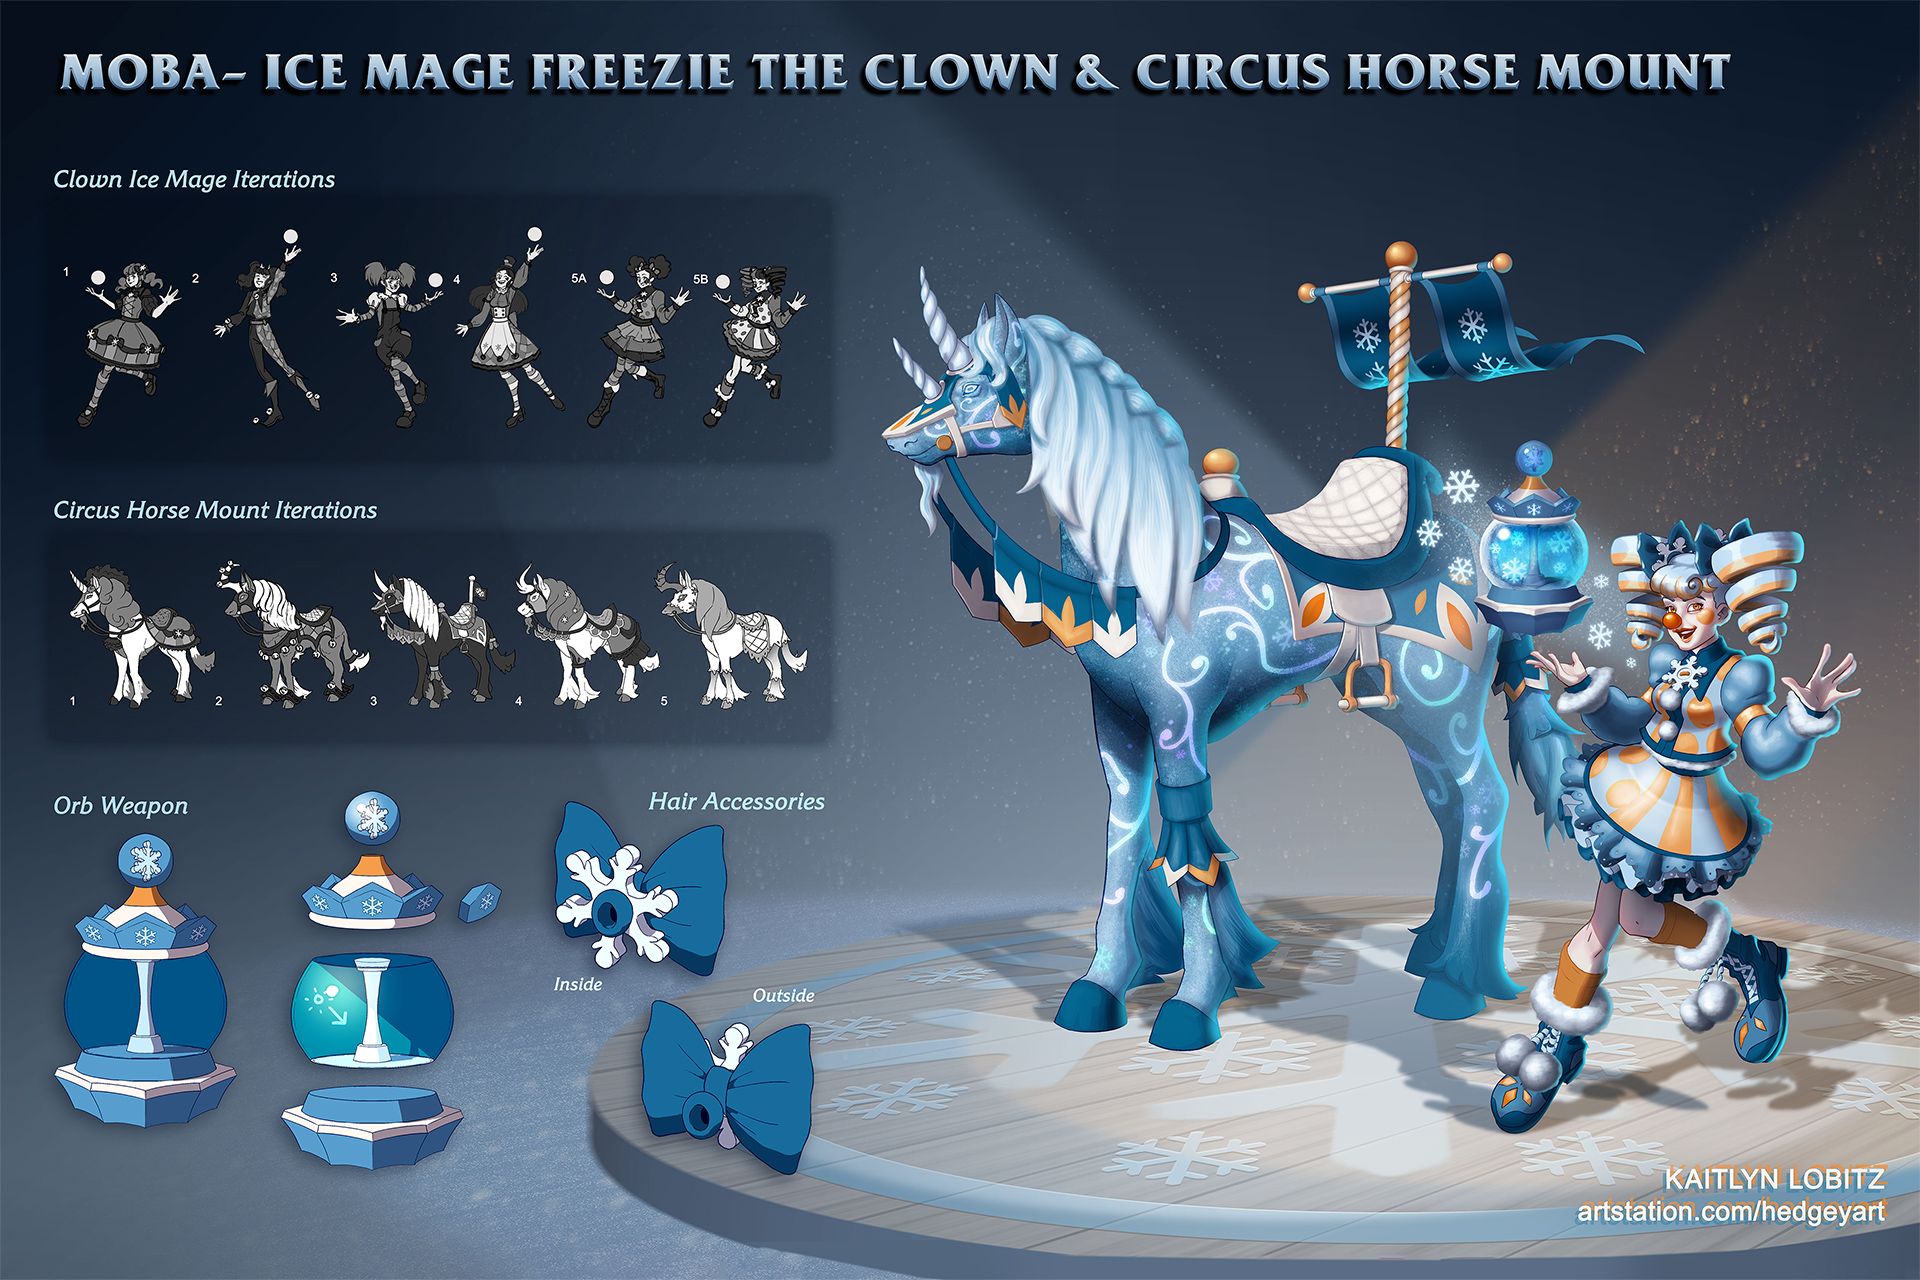 Ice Mage Freezie the Clown